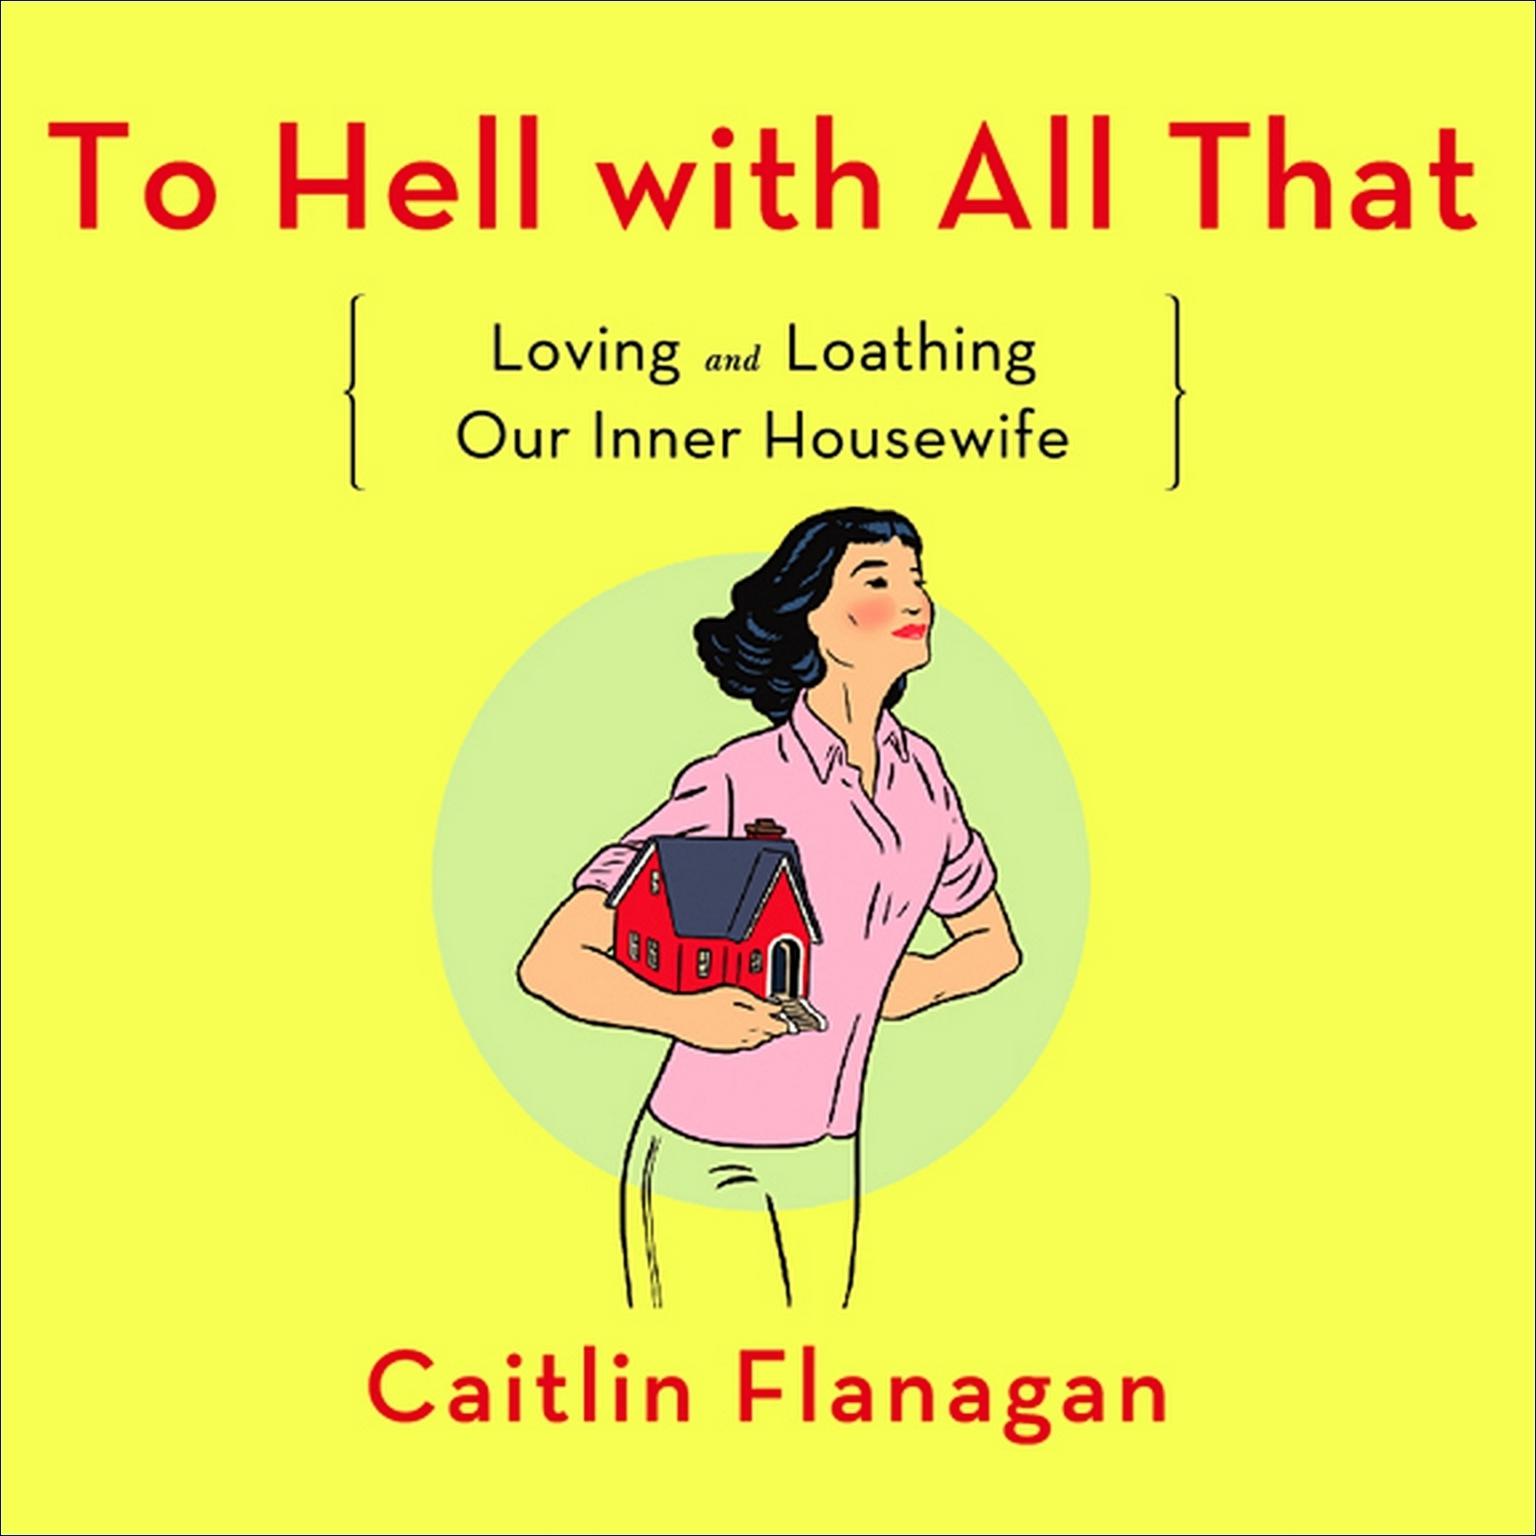 To Hell with All That: Loving and Loathing Our Inner Housewife Audiobook, by Caitlin Flanagan